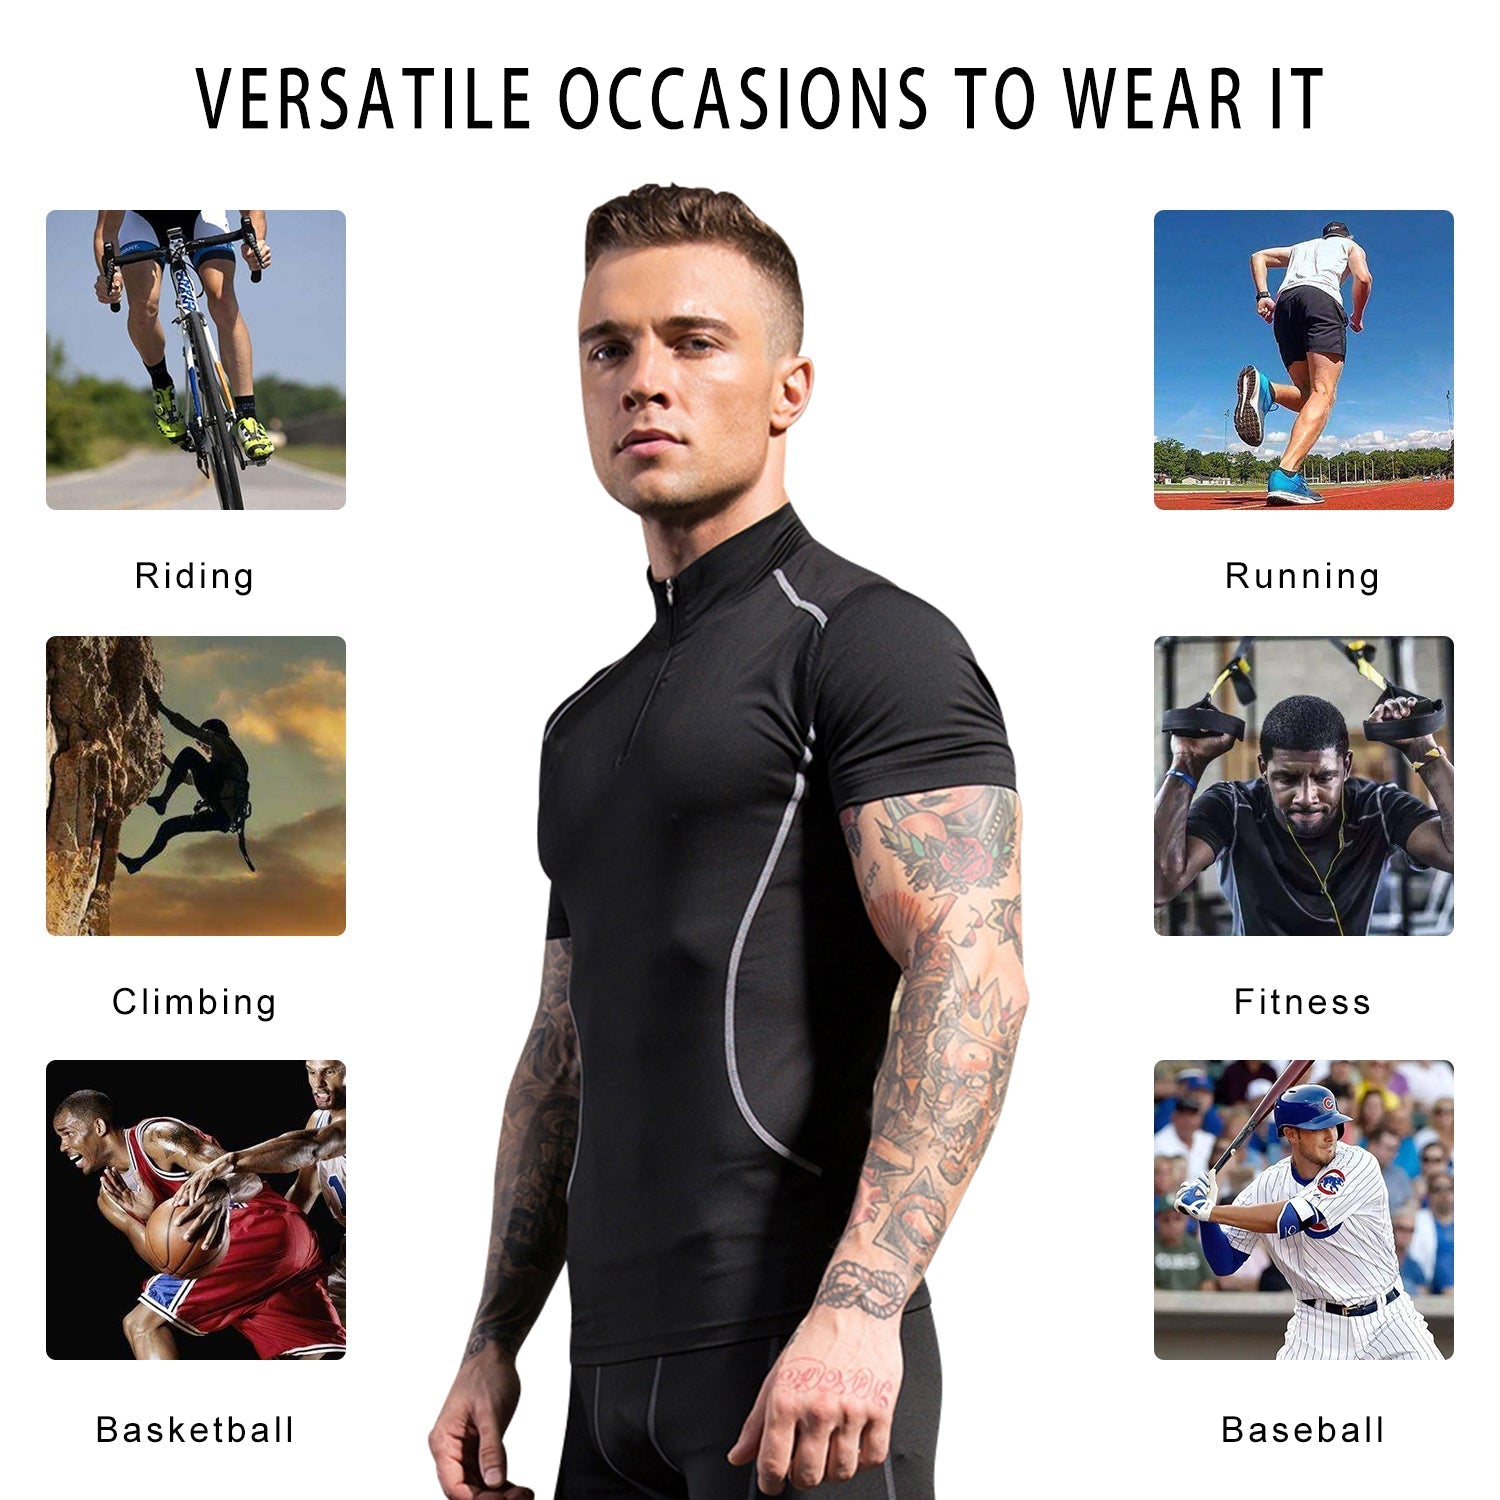 Mens Short Sleeve Compression Shirts 1/4 Zip Cool Quick-Dry Athletic Workout Baselayer Tops Running Sports Gym T-shirts LANBAOSI